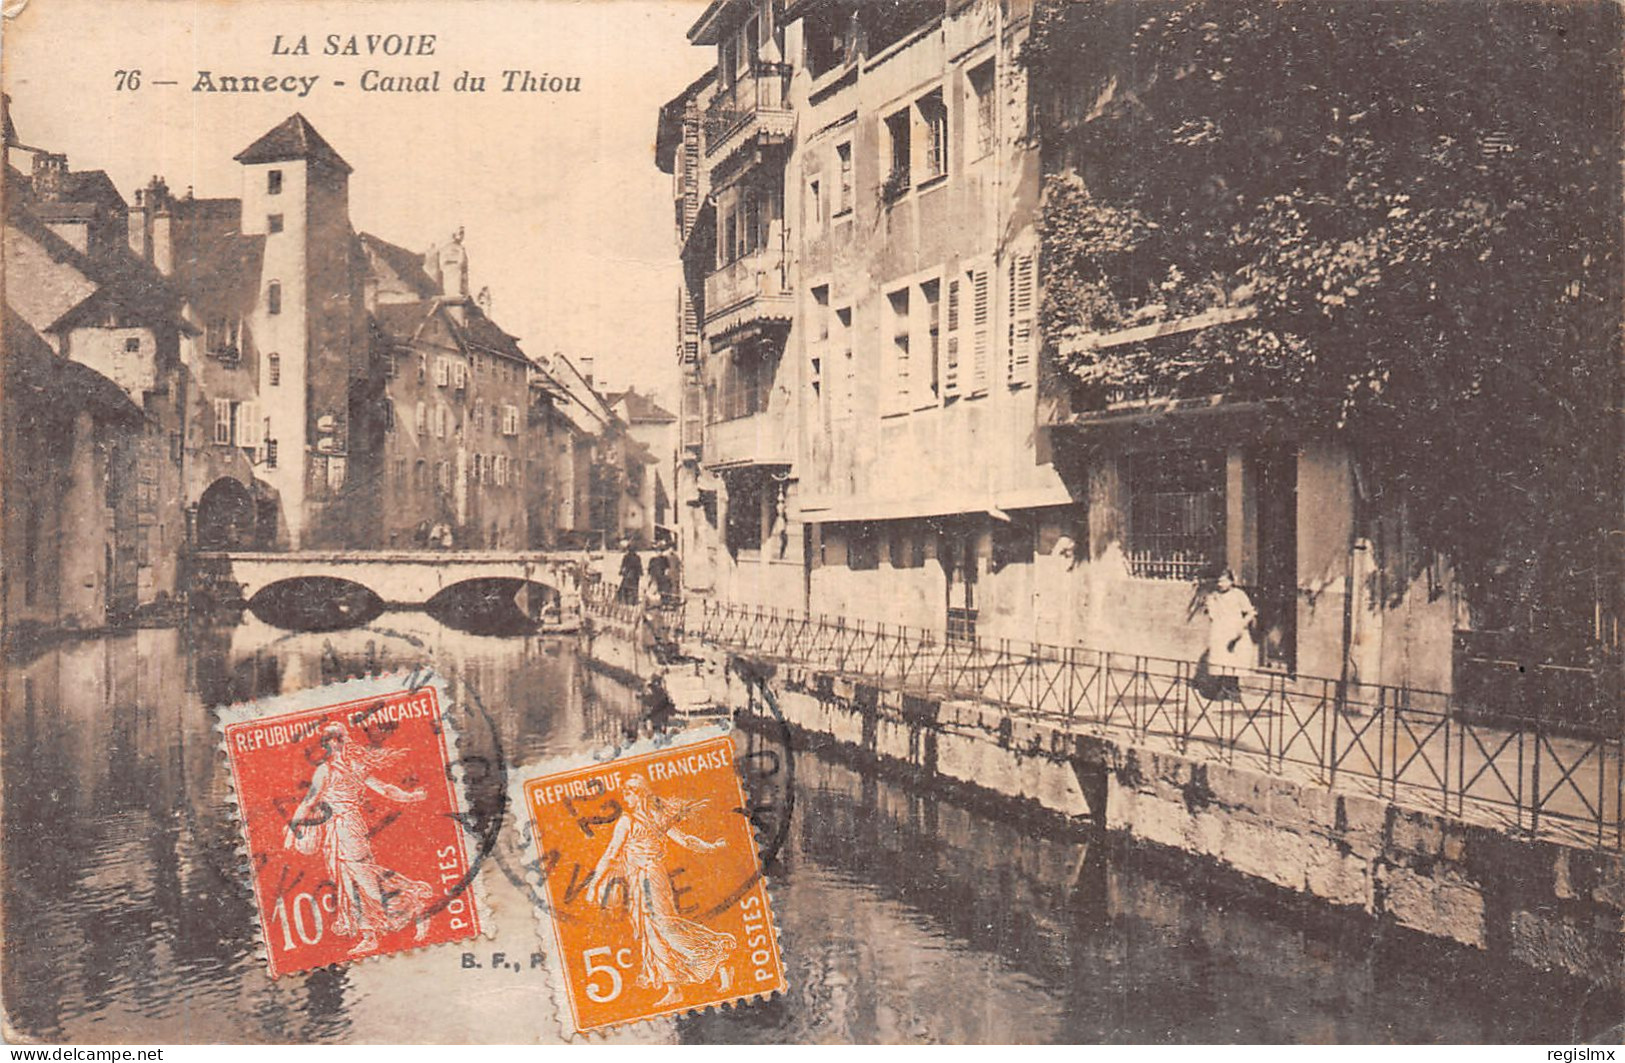 74-ANNECY-N°2142-E/0351 - Annecy